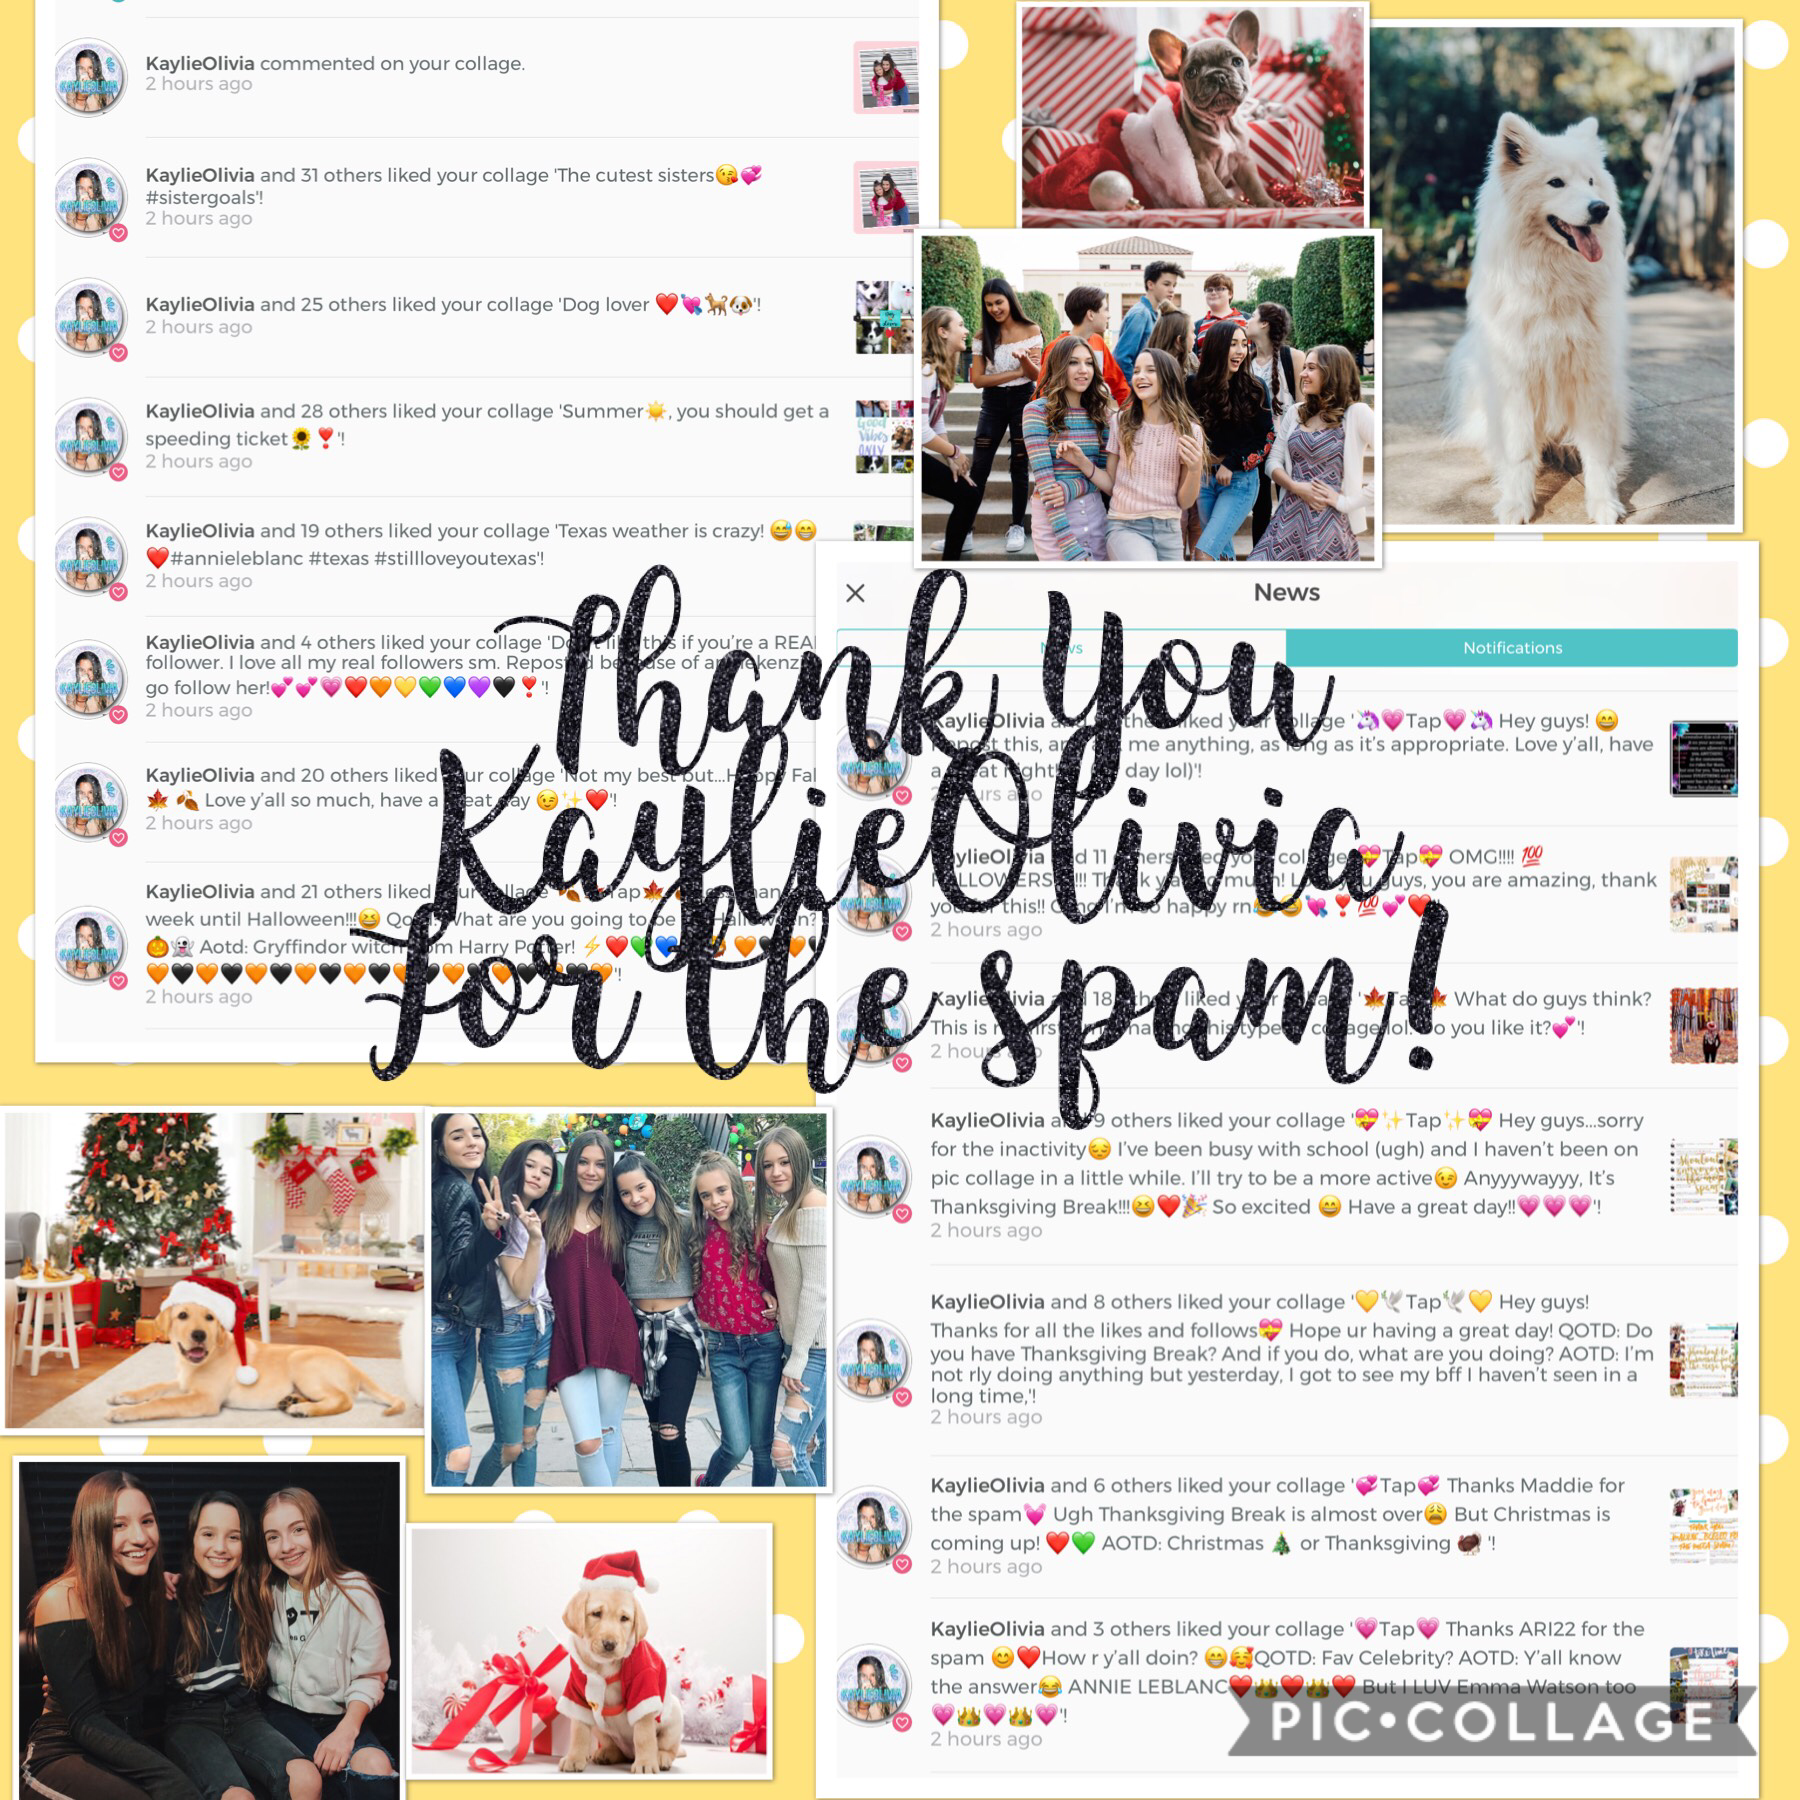 💛🎄Tap🎄💛
Thx KaylieOlivia 4 the spam 💖 it’s almost CHRISTMAS!!!🎄❤️💚!!! Aaaaand my birthday (December 19) 😜 So excited to celebrate w my friends and family! QOTD: Are you going out of town for Christmas? AOTD: Nope just celebrating with my family and friend